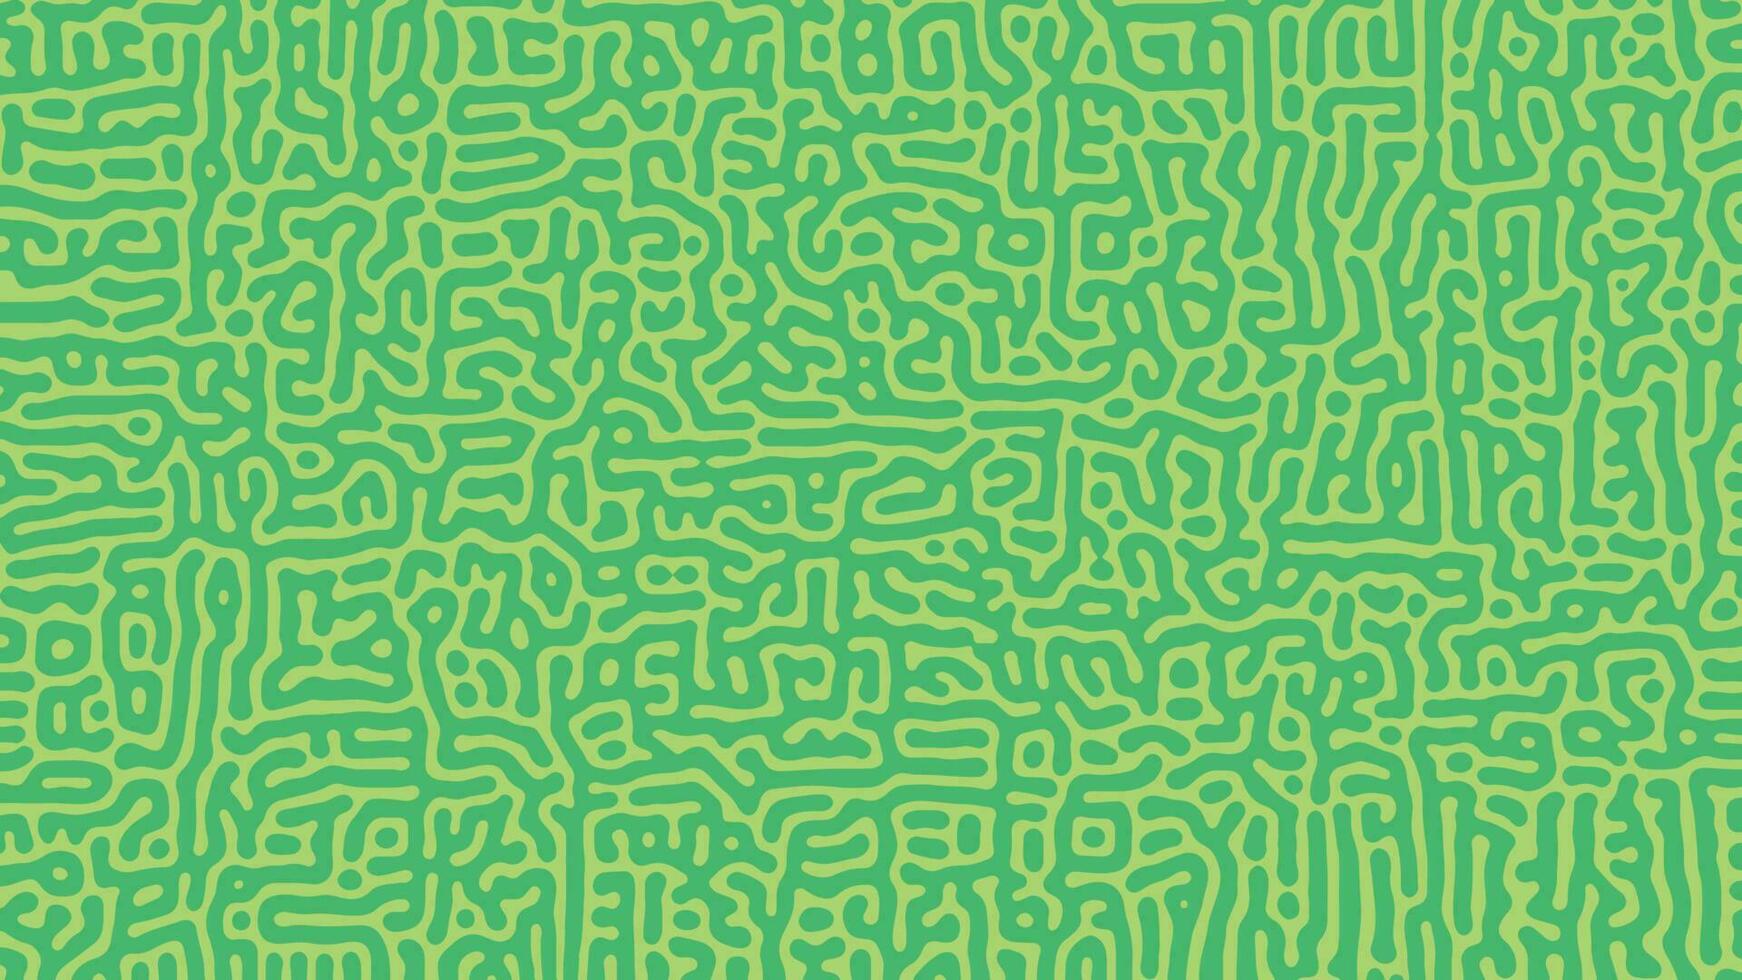 Green Turing reaction background. Abstract diffusion pattern with chaotic shapes. Vector illustration.